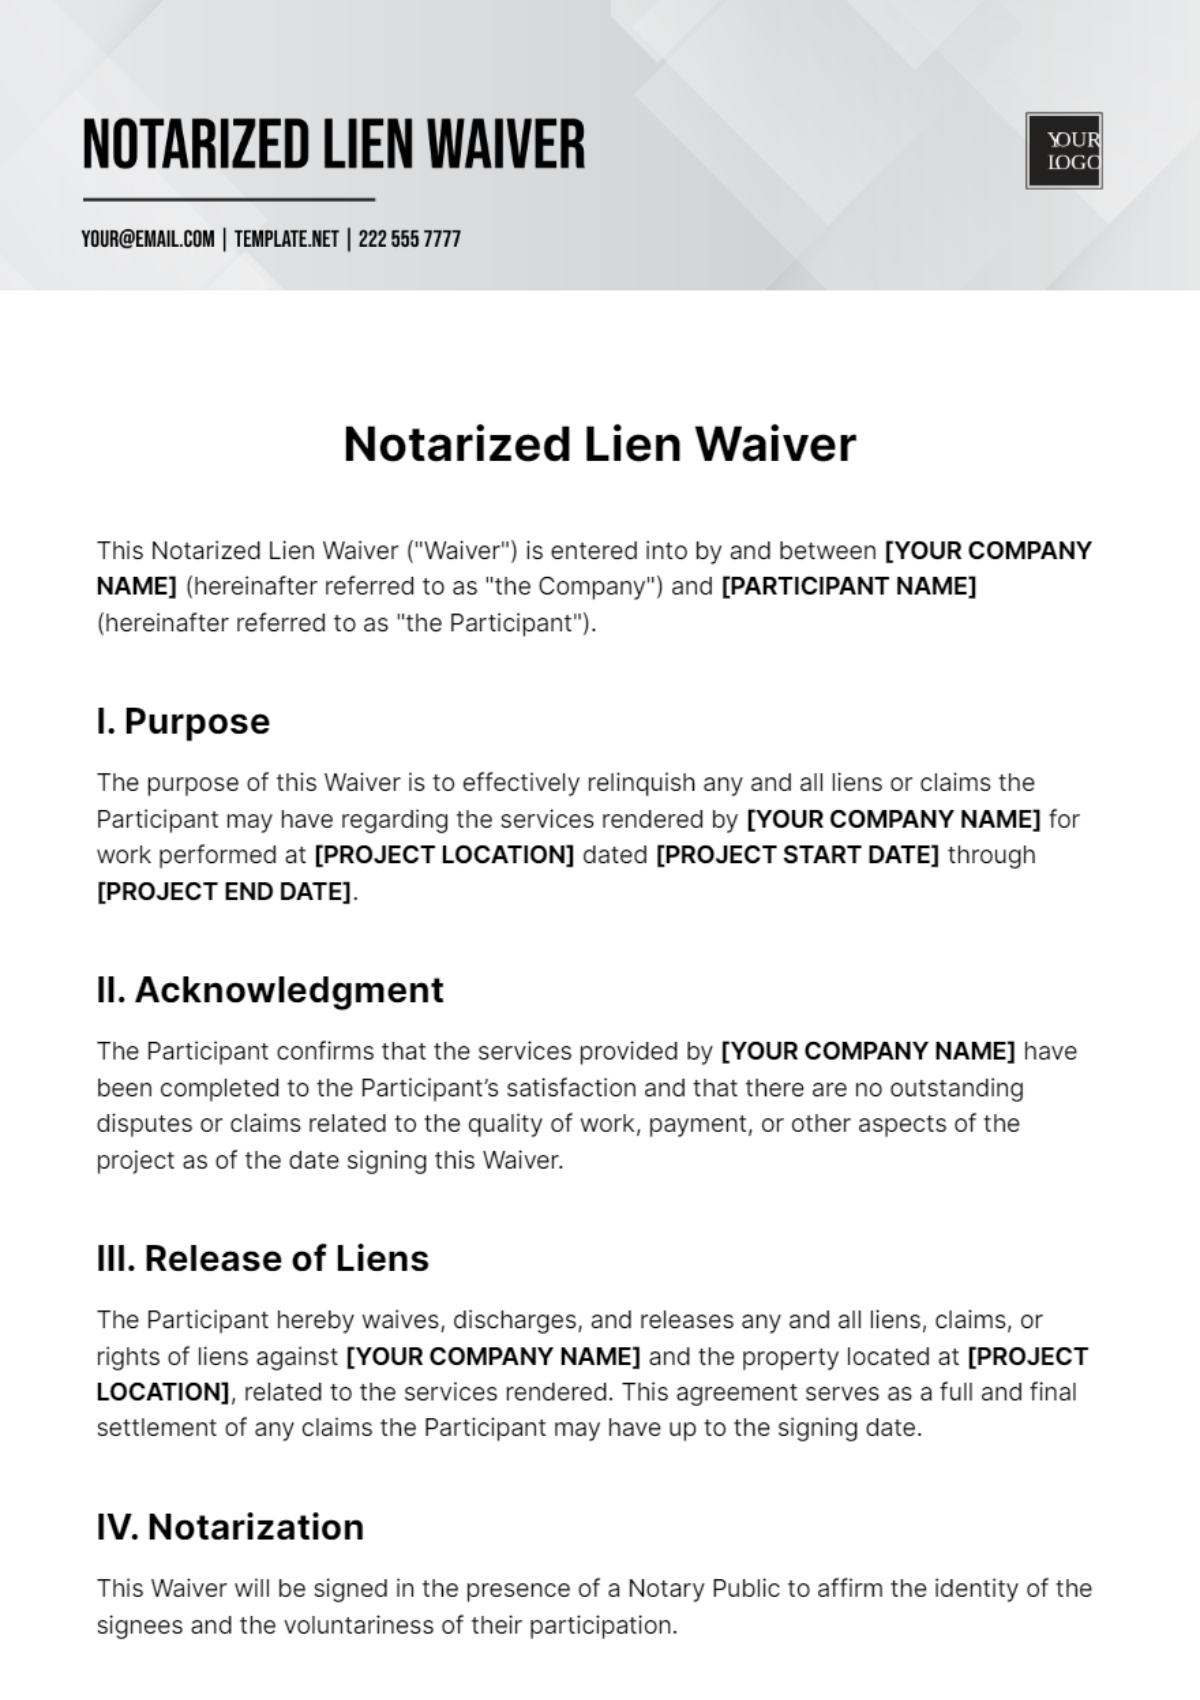 Notarized Lien Waiver Template